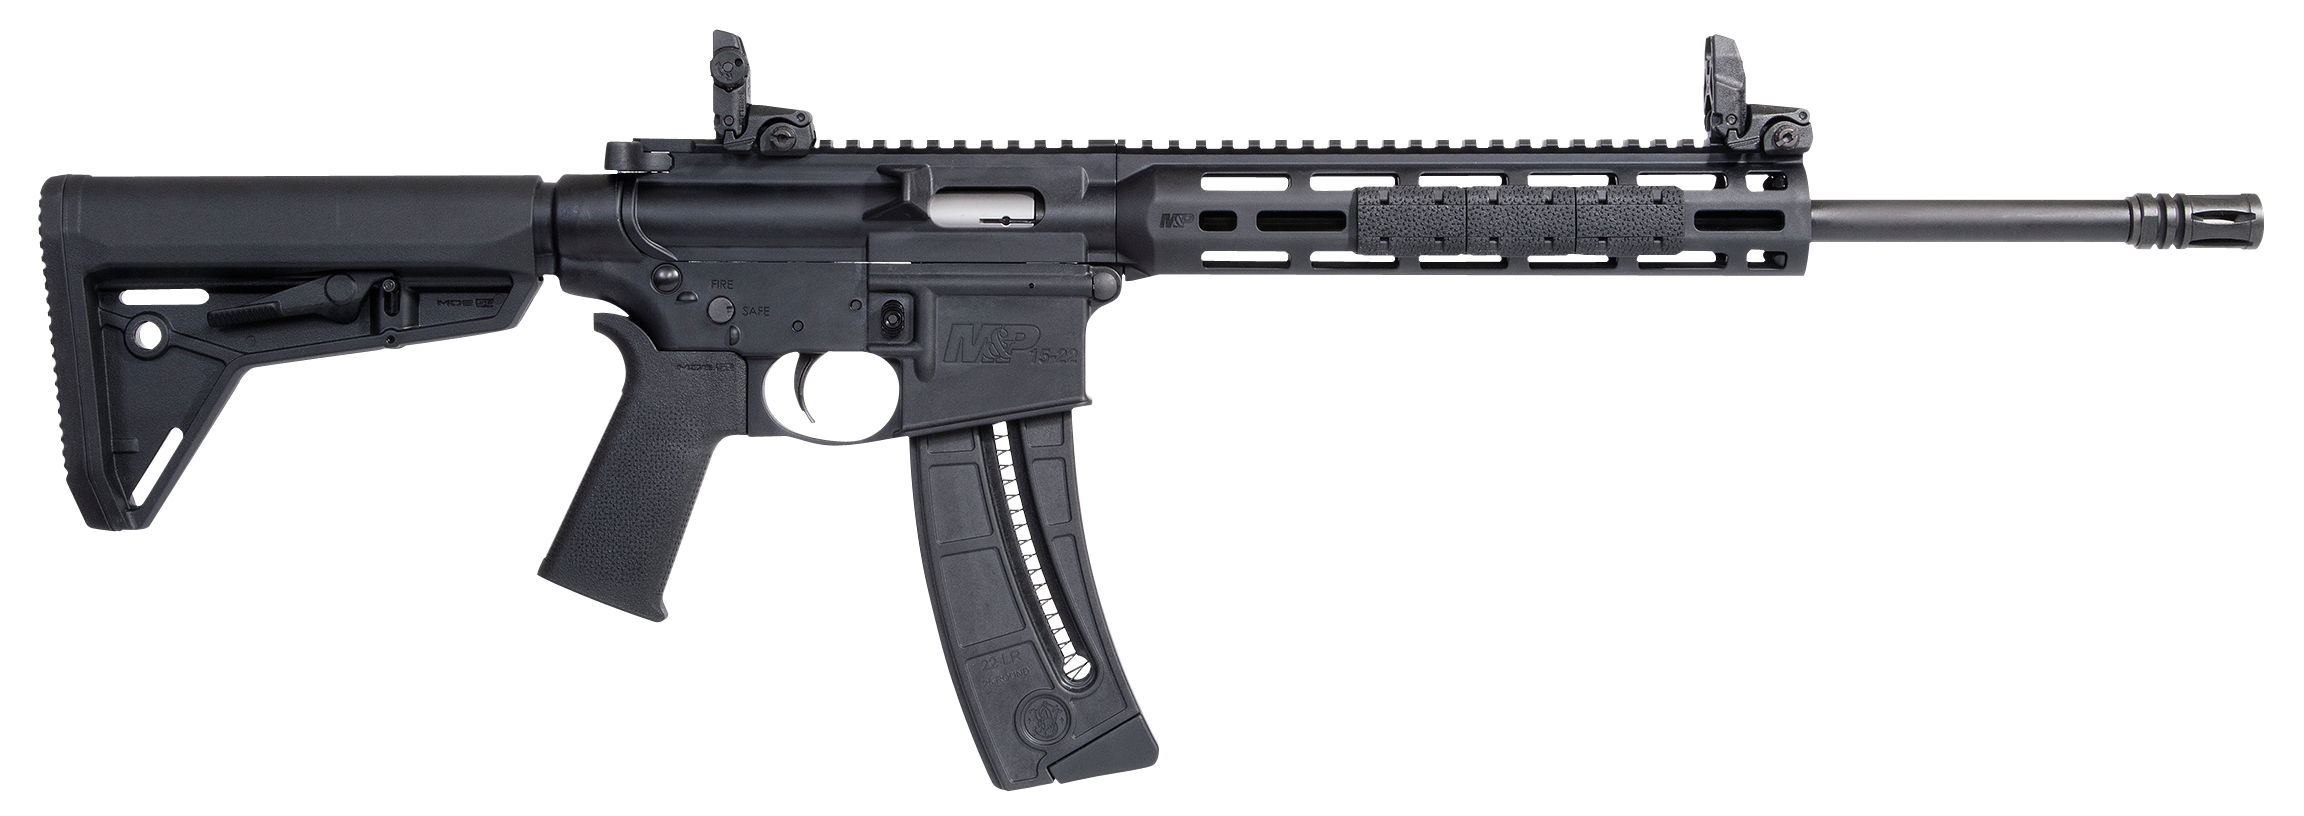 Smith & Wesson S&W M&P15-22 Sport 22 LR Caliber with 25+1 Capacity 10213-img-6